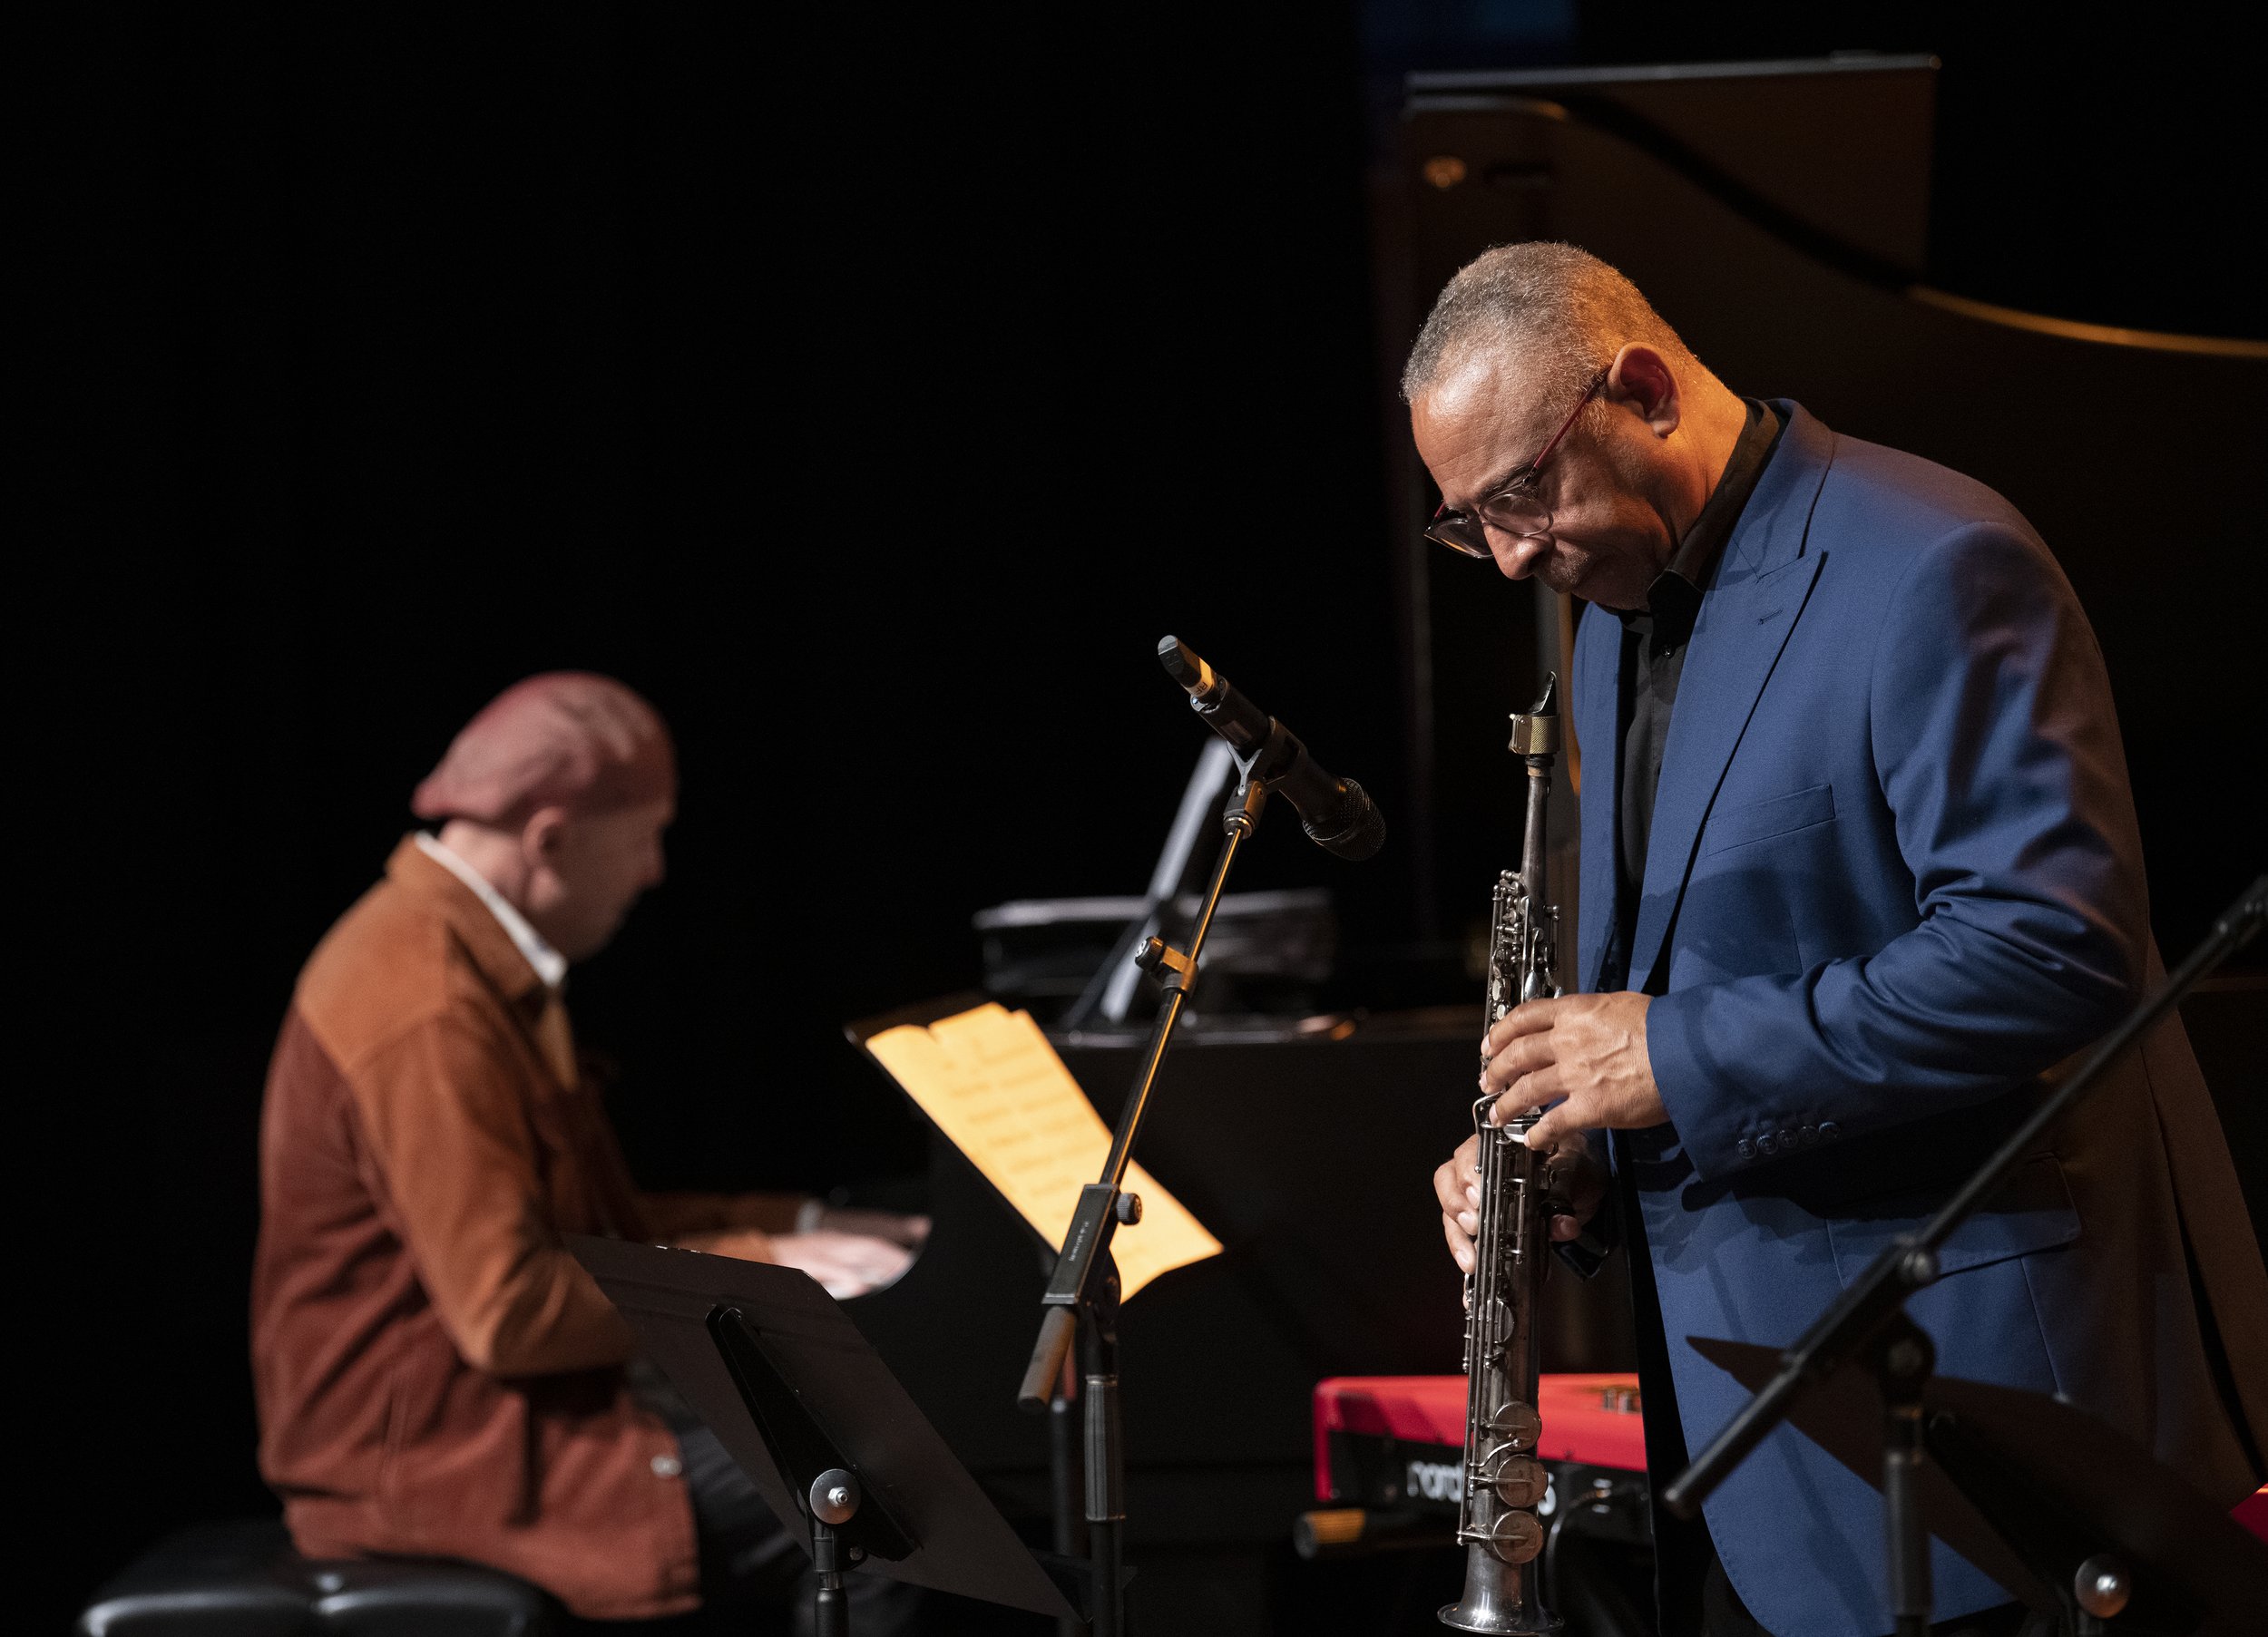  Santa Monica College Music Department Jazz Ensemble Tribute to Innovator Composer Saxophonist Wayne Shorter Monday, May 22 ,2023 at the The Music Hall Santa Monica College Performing Art’s Center 